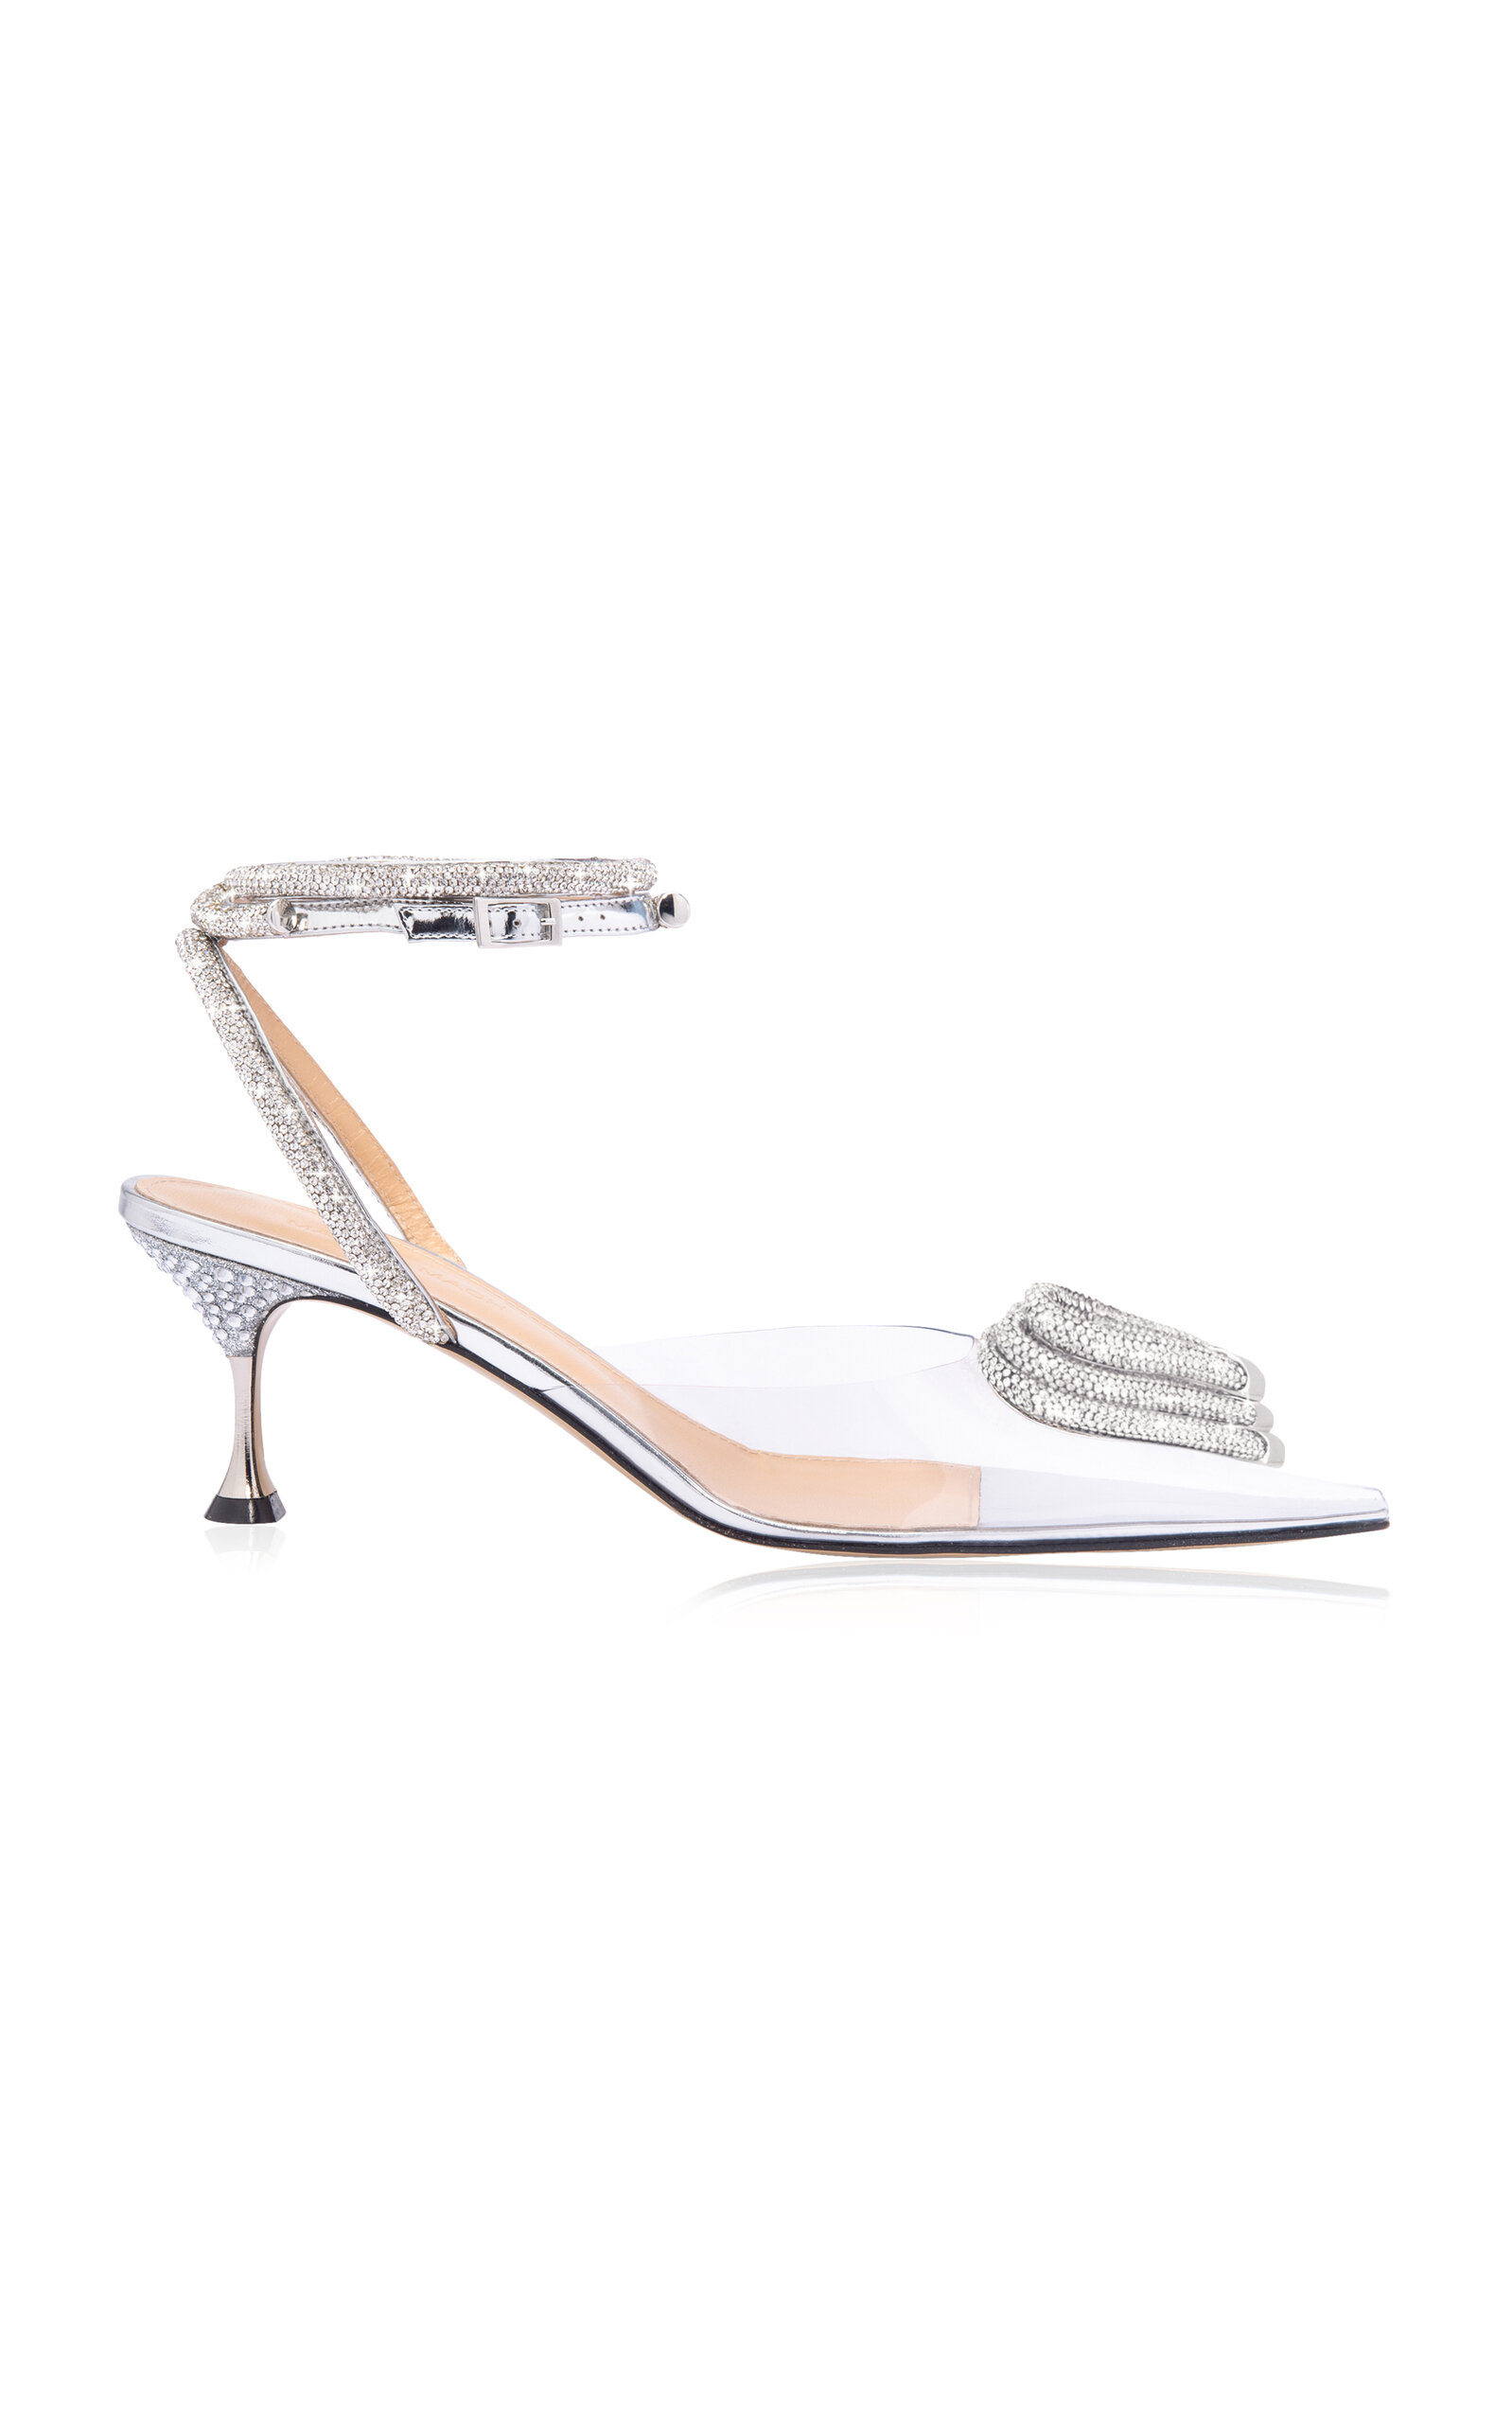 Mach & Mach Triple Heart Crystal-embellished Pvc And Metallic Leather Pumps In Silver